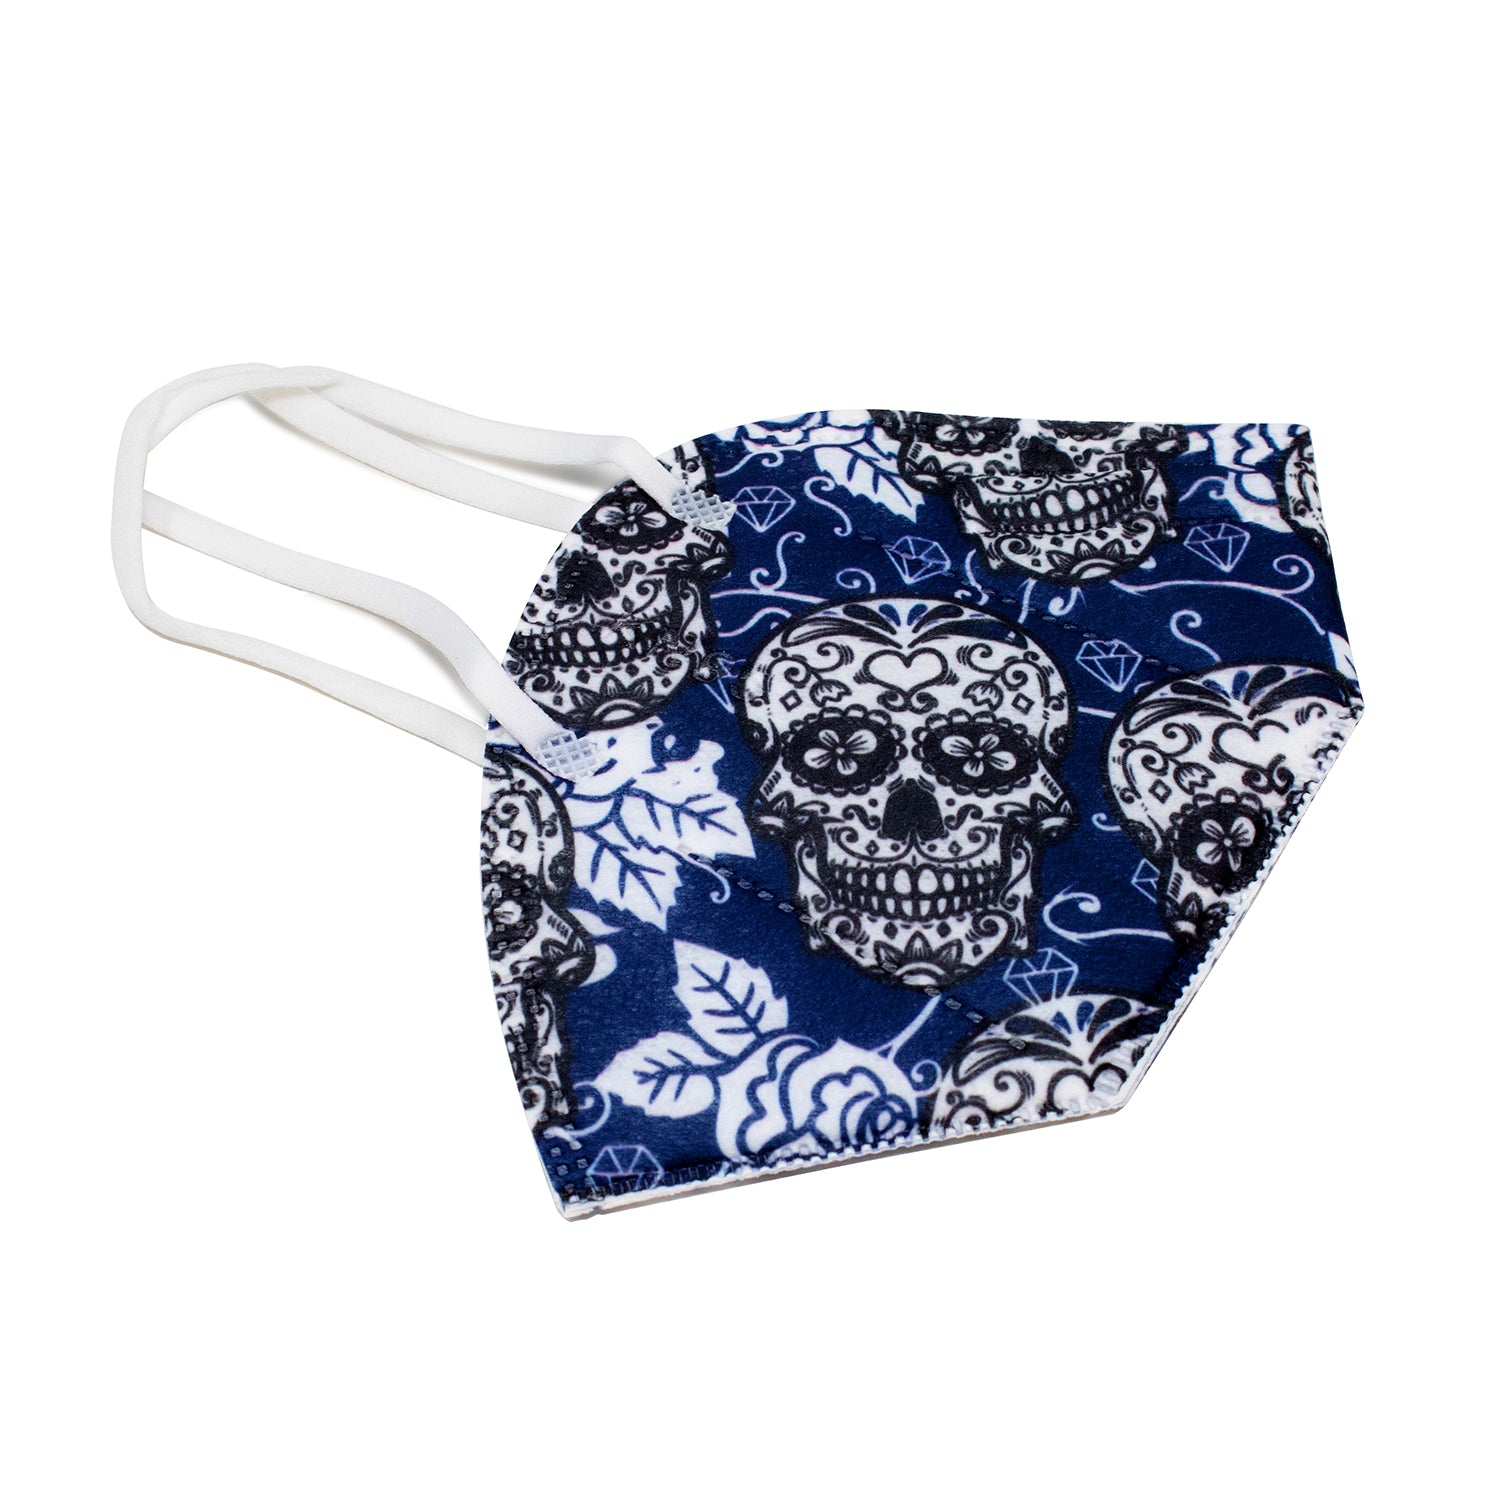 Safe KN95 mask with dio de los muertos skull with white stripes. Reusable mask, strong elastic straps.  High quality reusable KN95 masks are the safest masks available. 